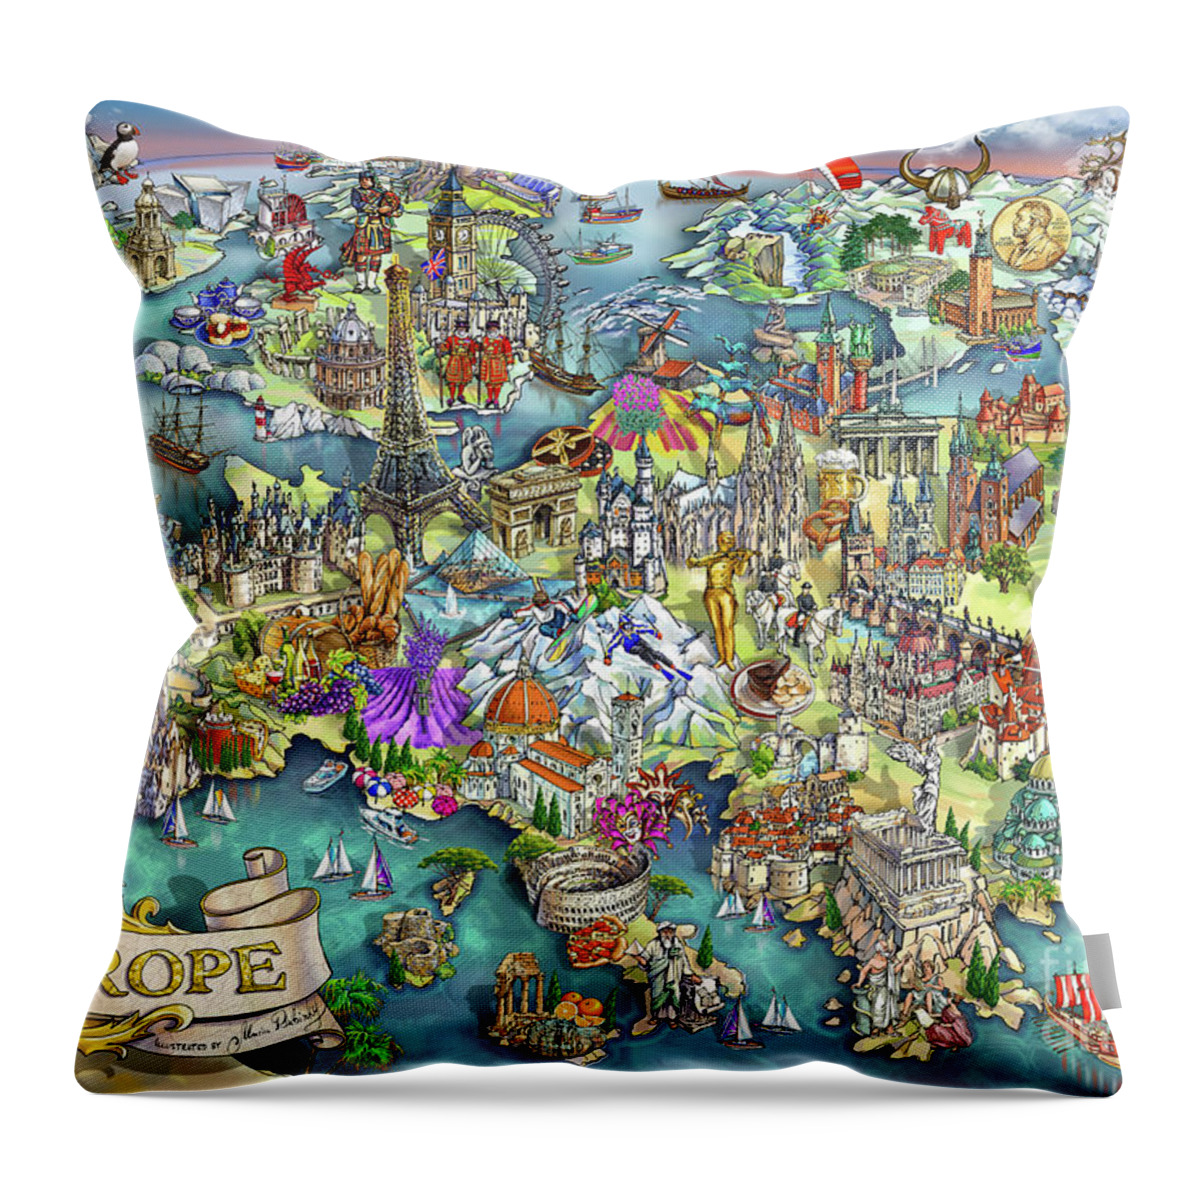 Europe Throw Pillow featuring the painting Illustrated Map of Europe by Maria Rabinky